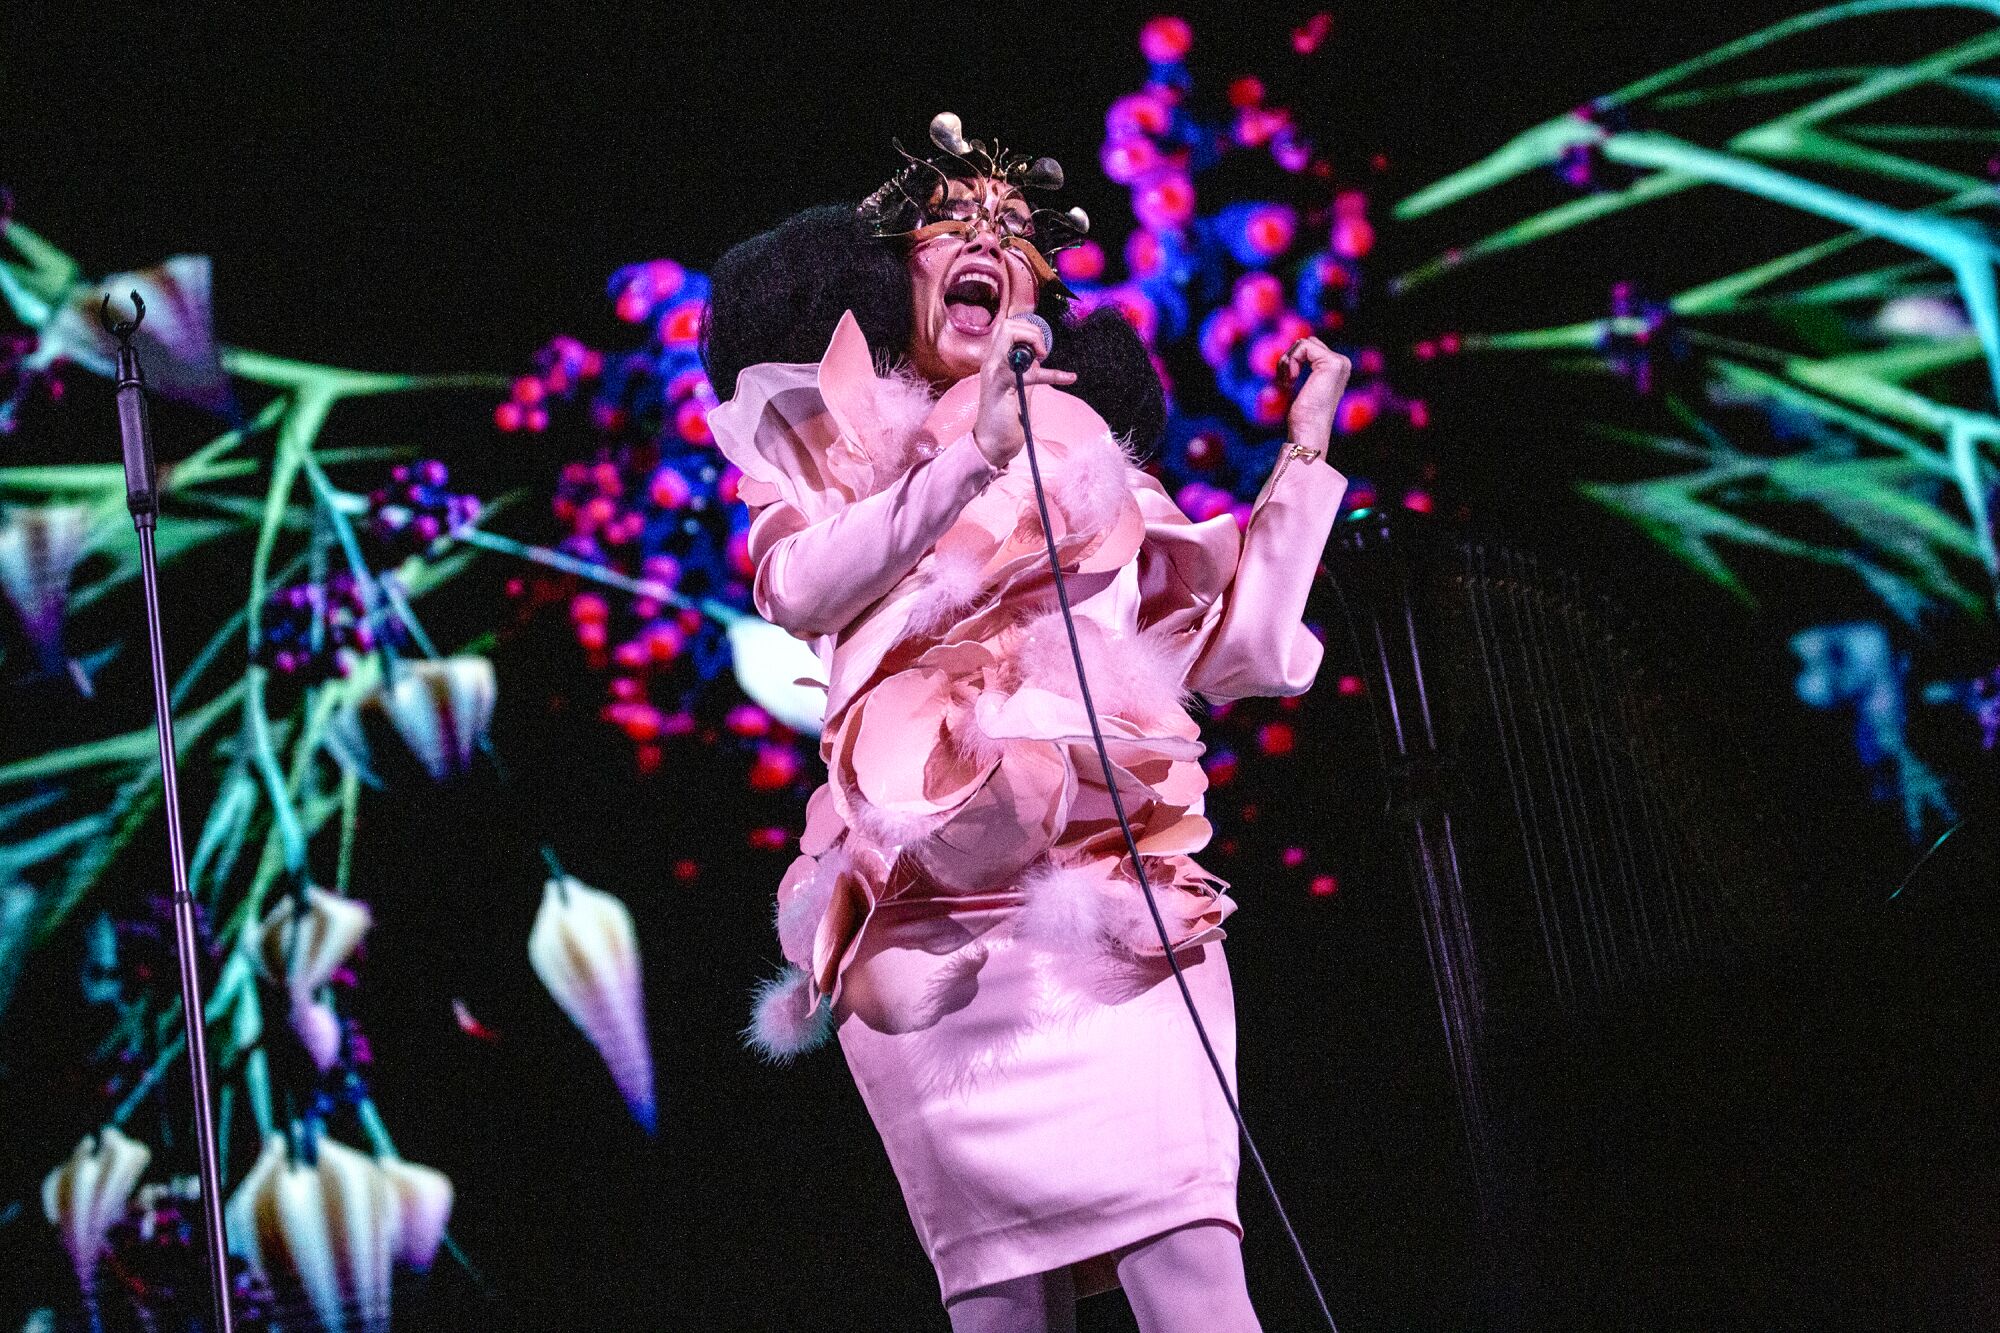 A woman in pink sings into a microphone.